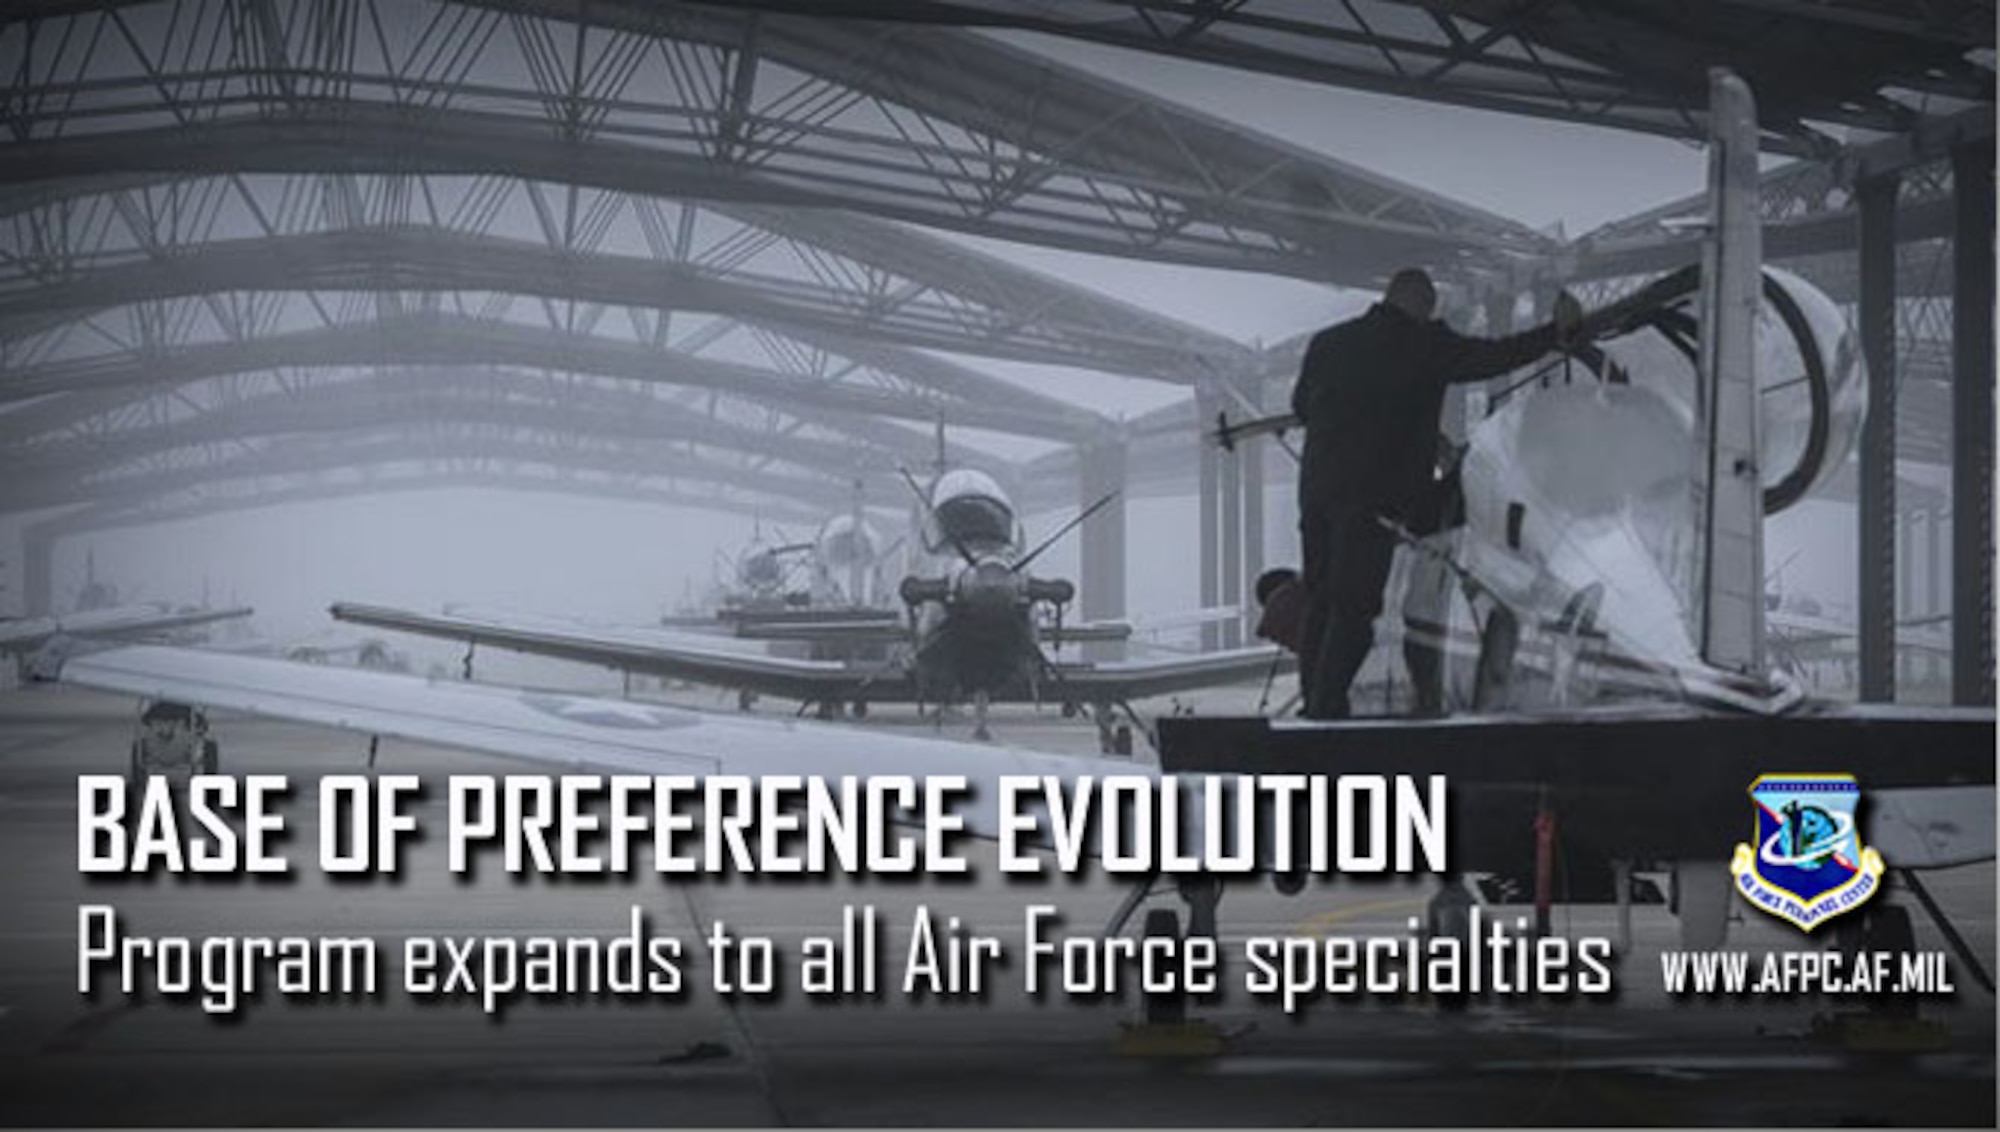 Air Force base of preference initiative evolves to permanent program